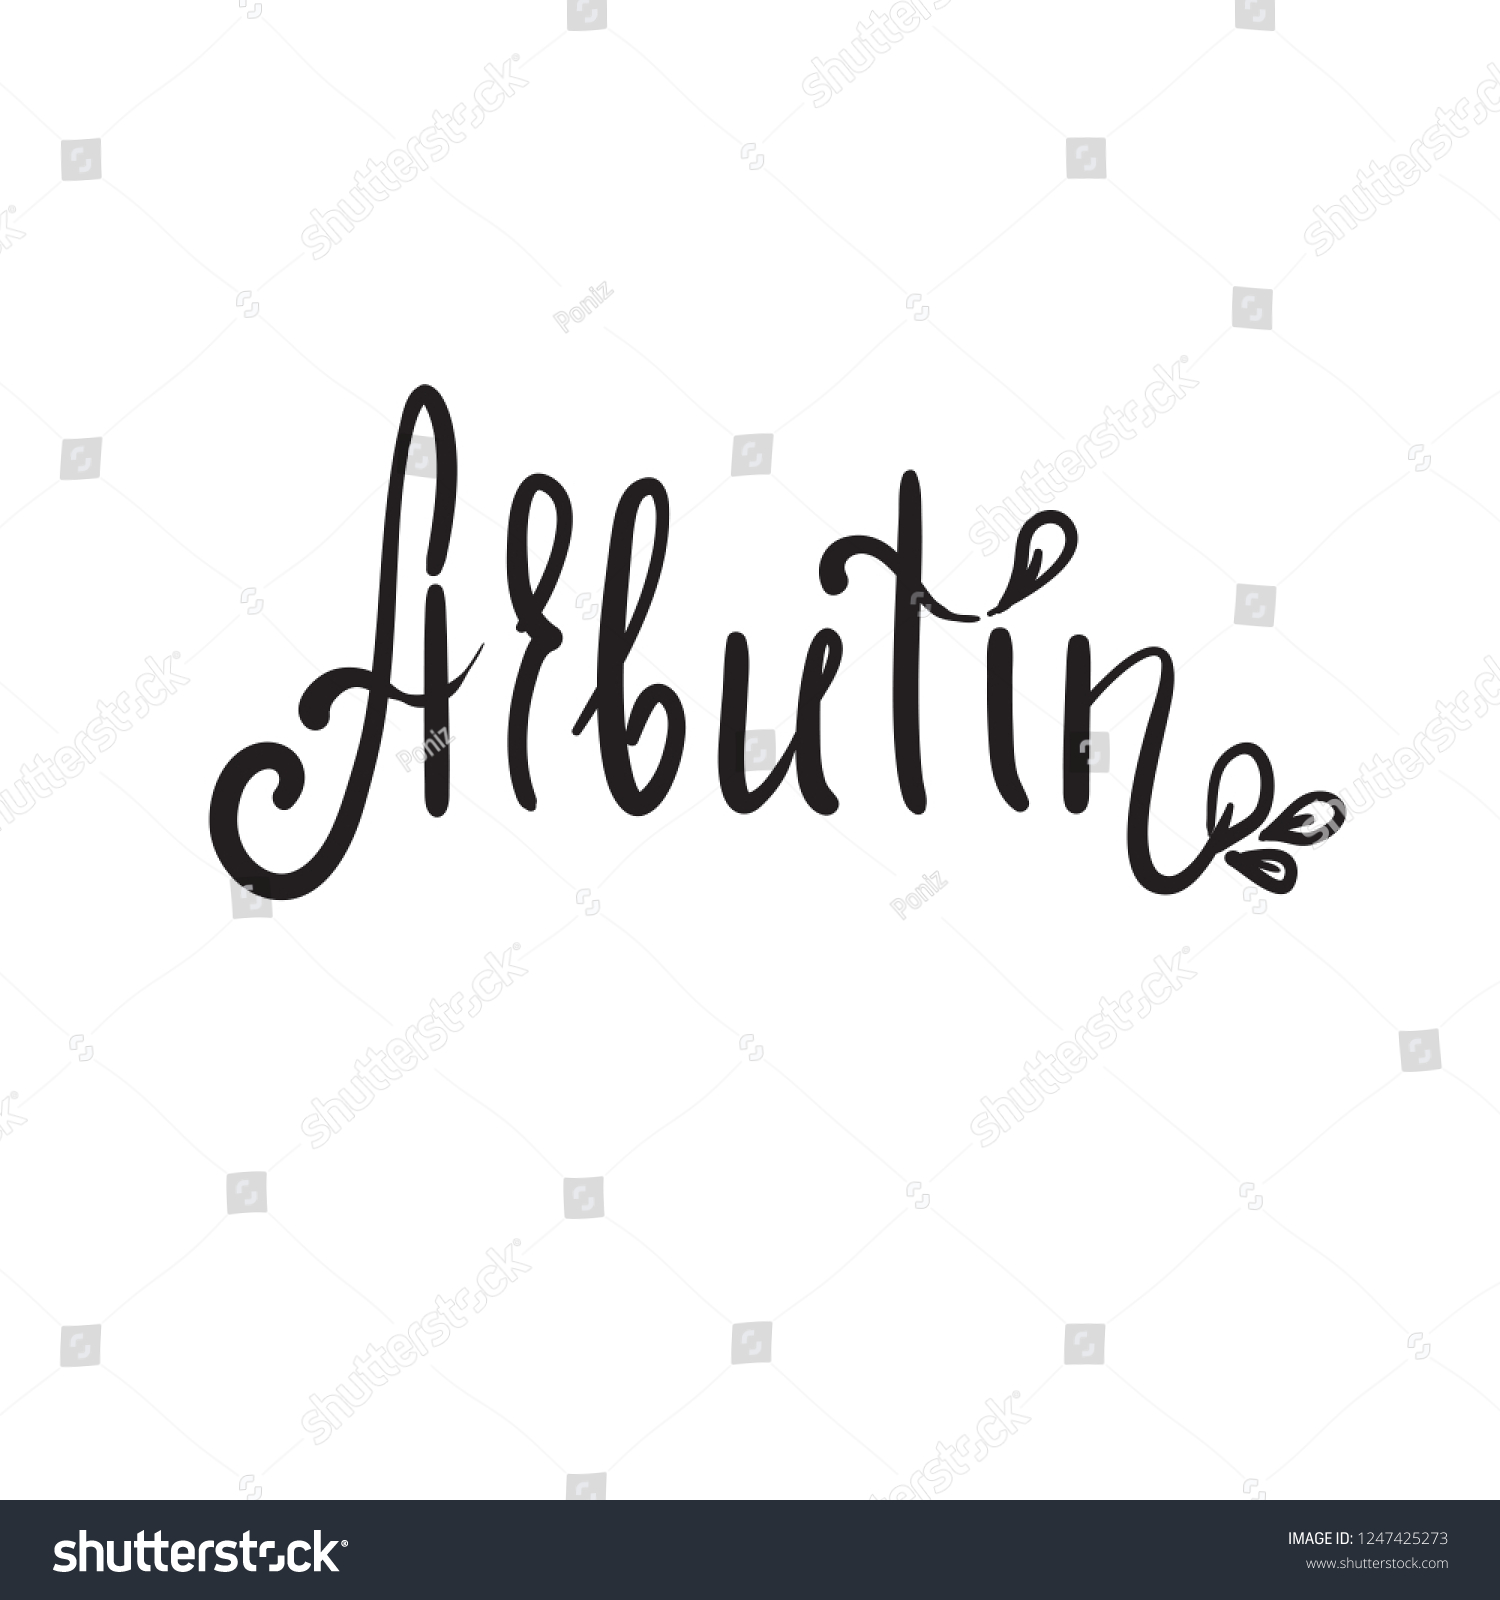 SVG of Arbutin - handwritten name of arbutin. Print for labels, advertising, price tag, brochure, booklet, tablets, cosmetics and cream packaging. Elegant calligraphy sign, trendy fashion style. svg